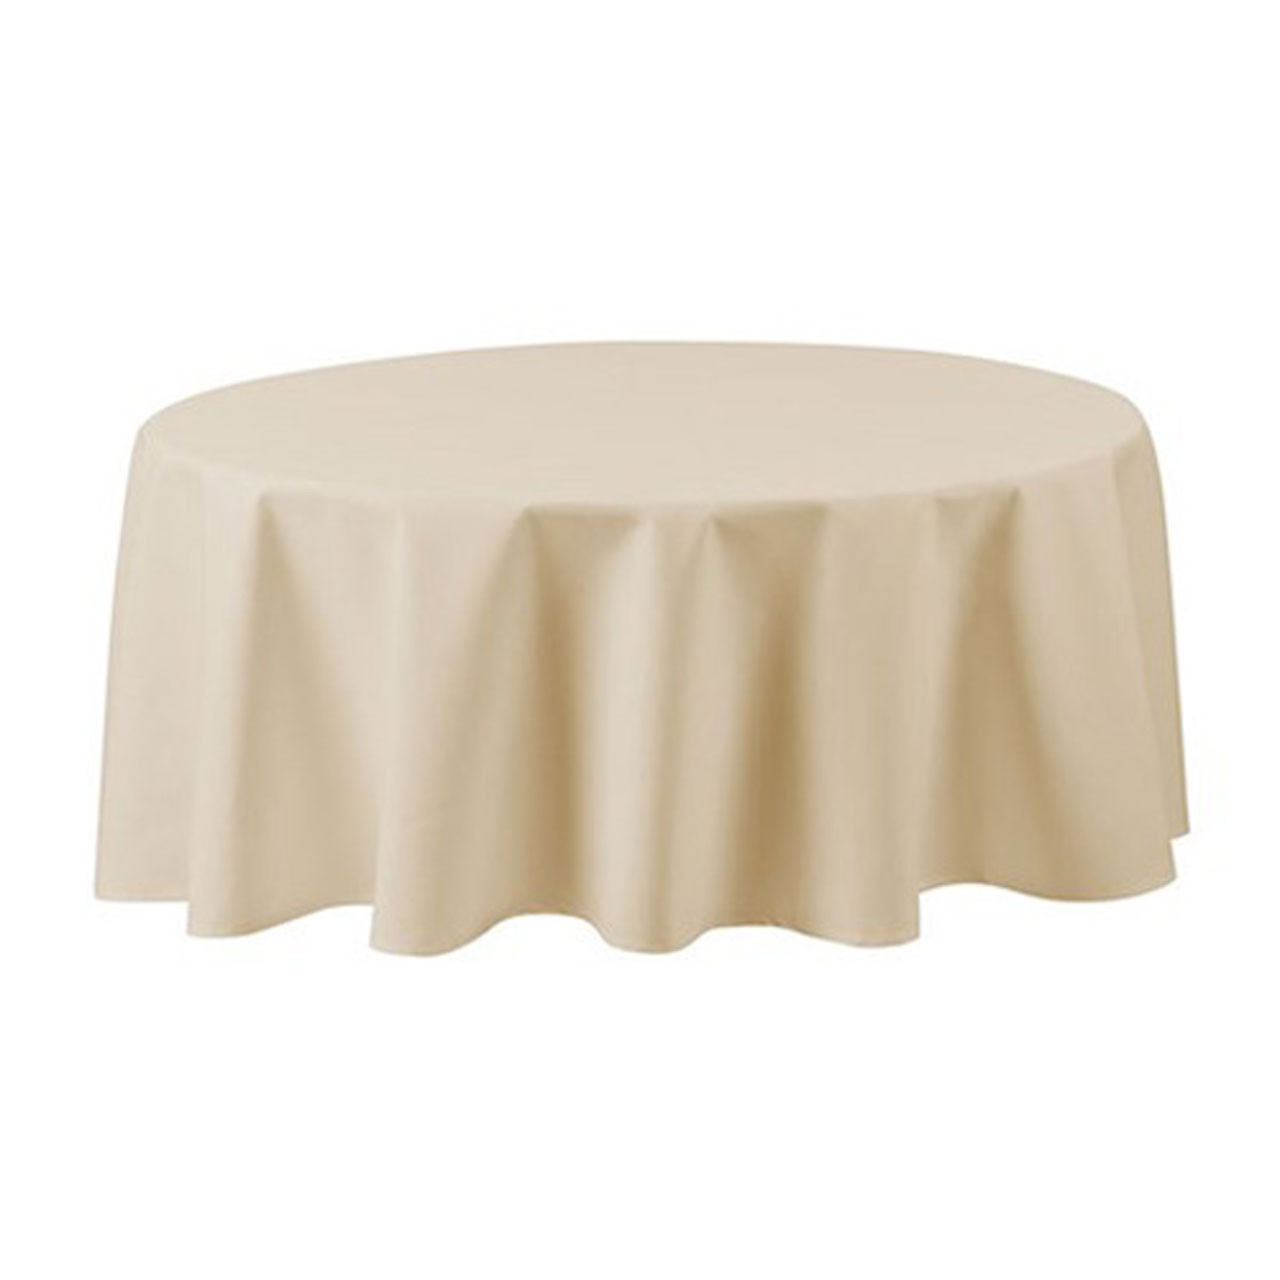 Are samples provided for the 120'' round ivory tablecloth wholesale?